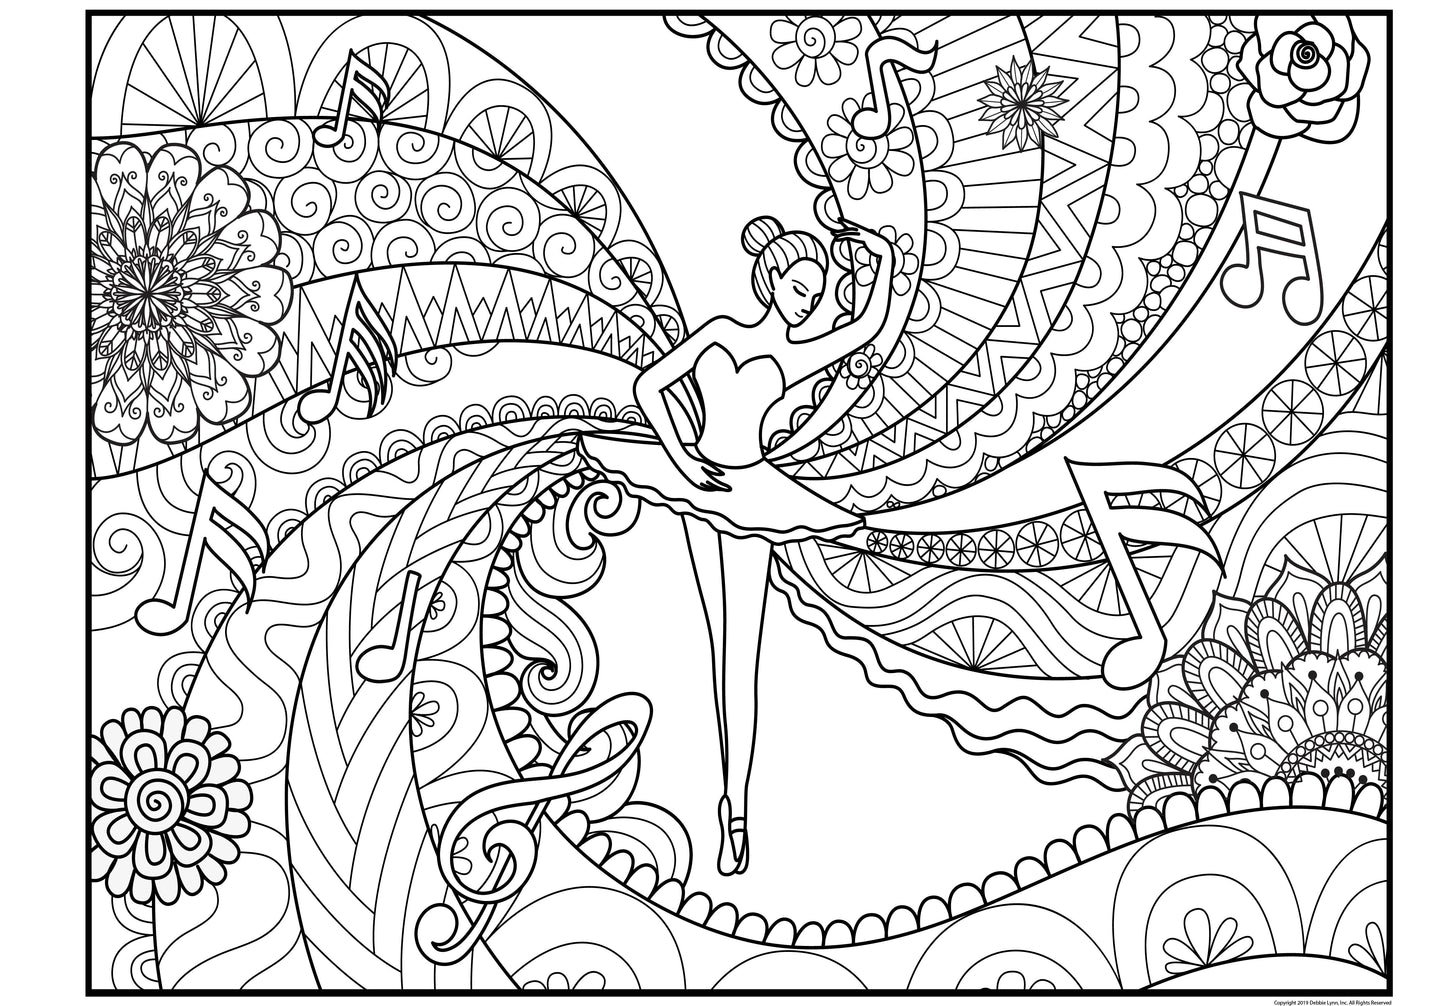 Dancer Personalized Giant Coloring Poster 46"x60"